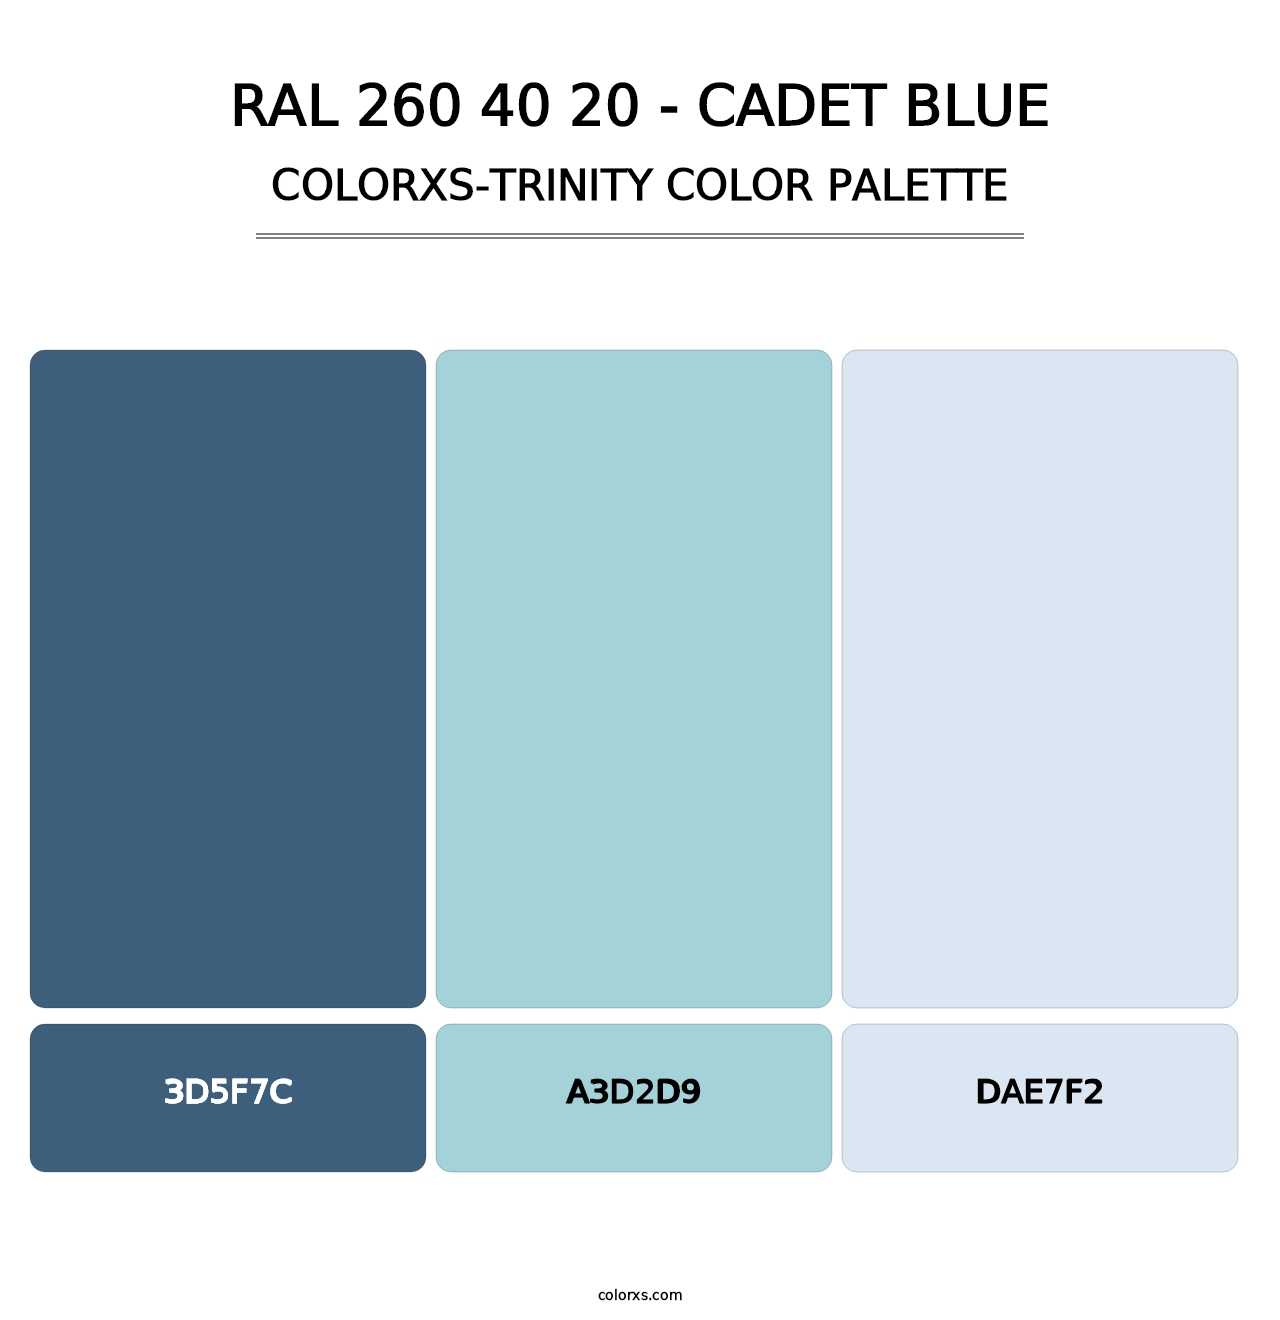 RAL 260 40 20 - Cadet Blue - Colorxs Trinity Palette